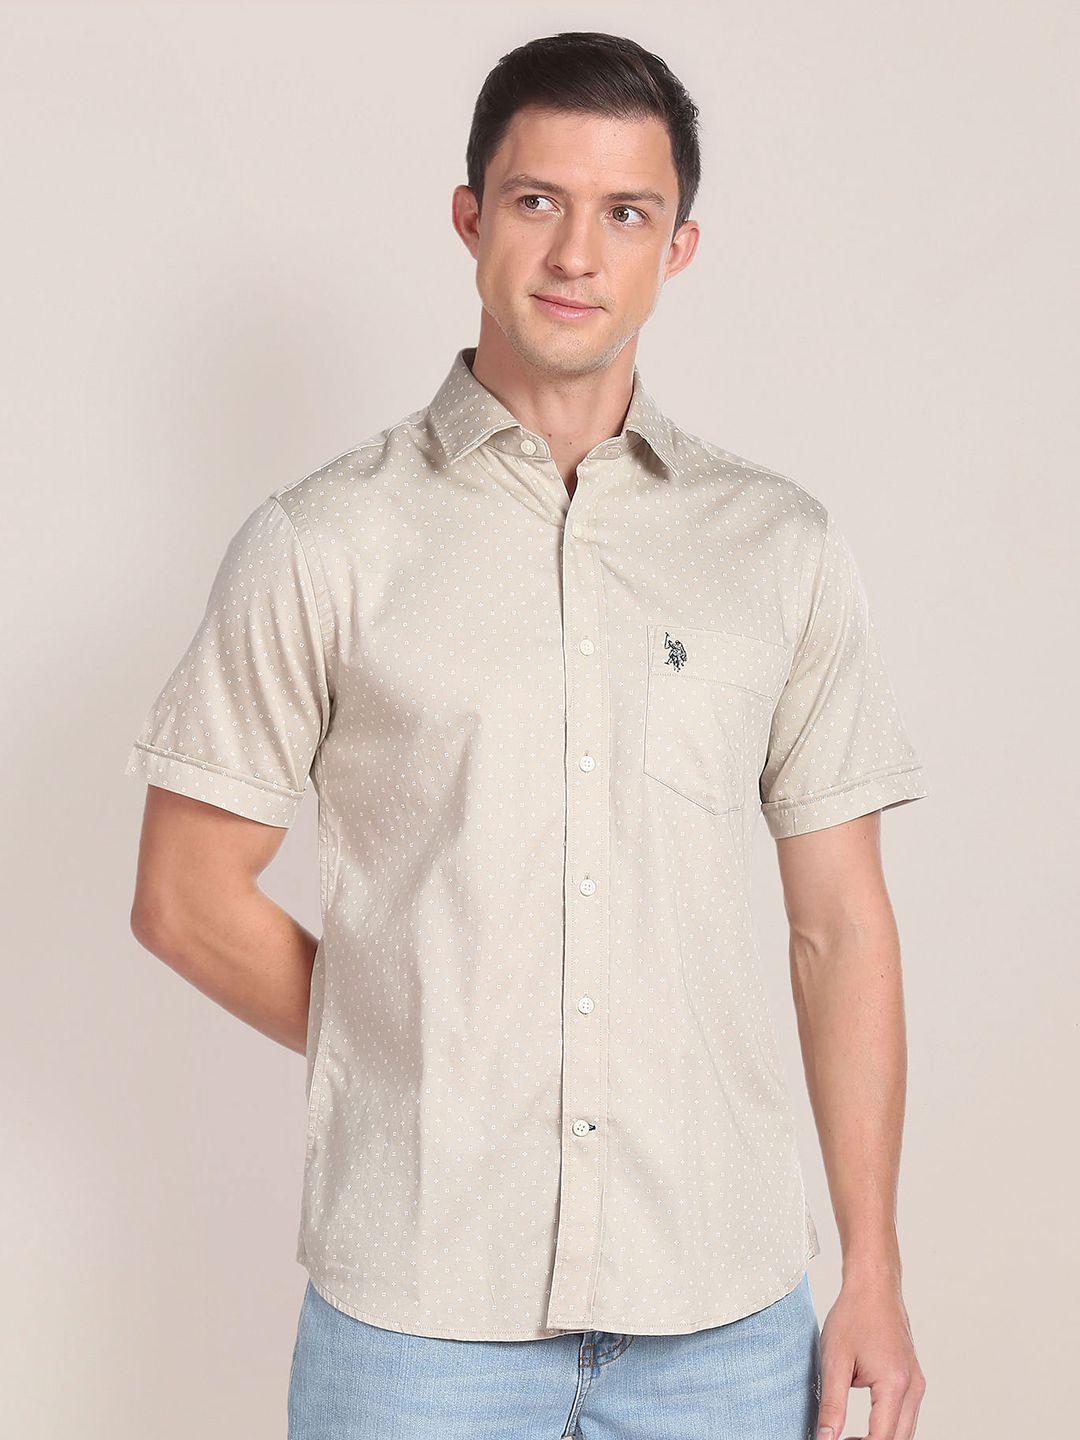 u-s-polo-assn-micro-ditsy-printed-spread-collar-regular-fit-cotton-casual-t-shirt